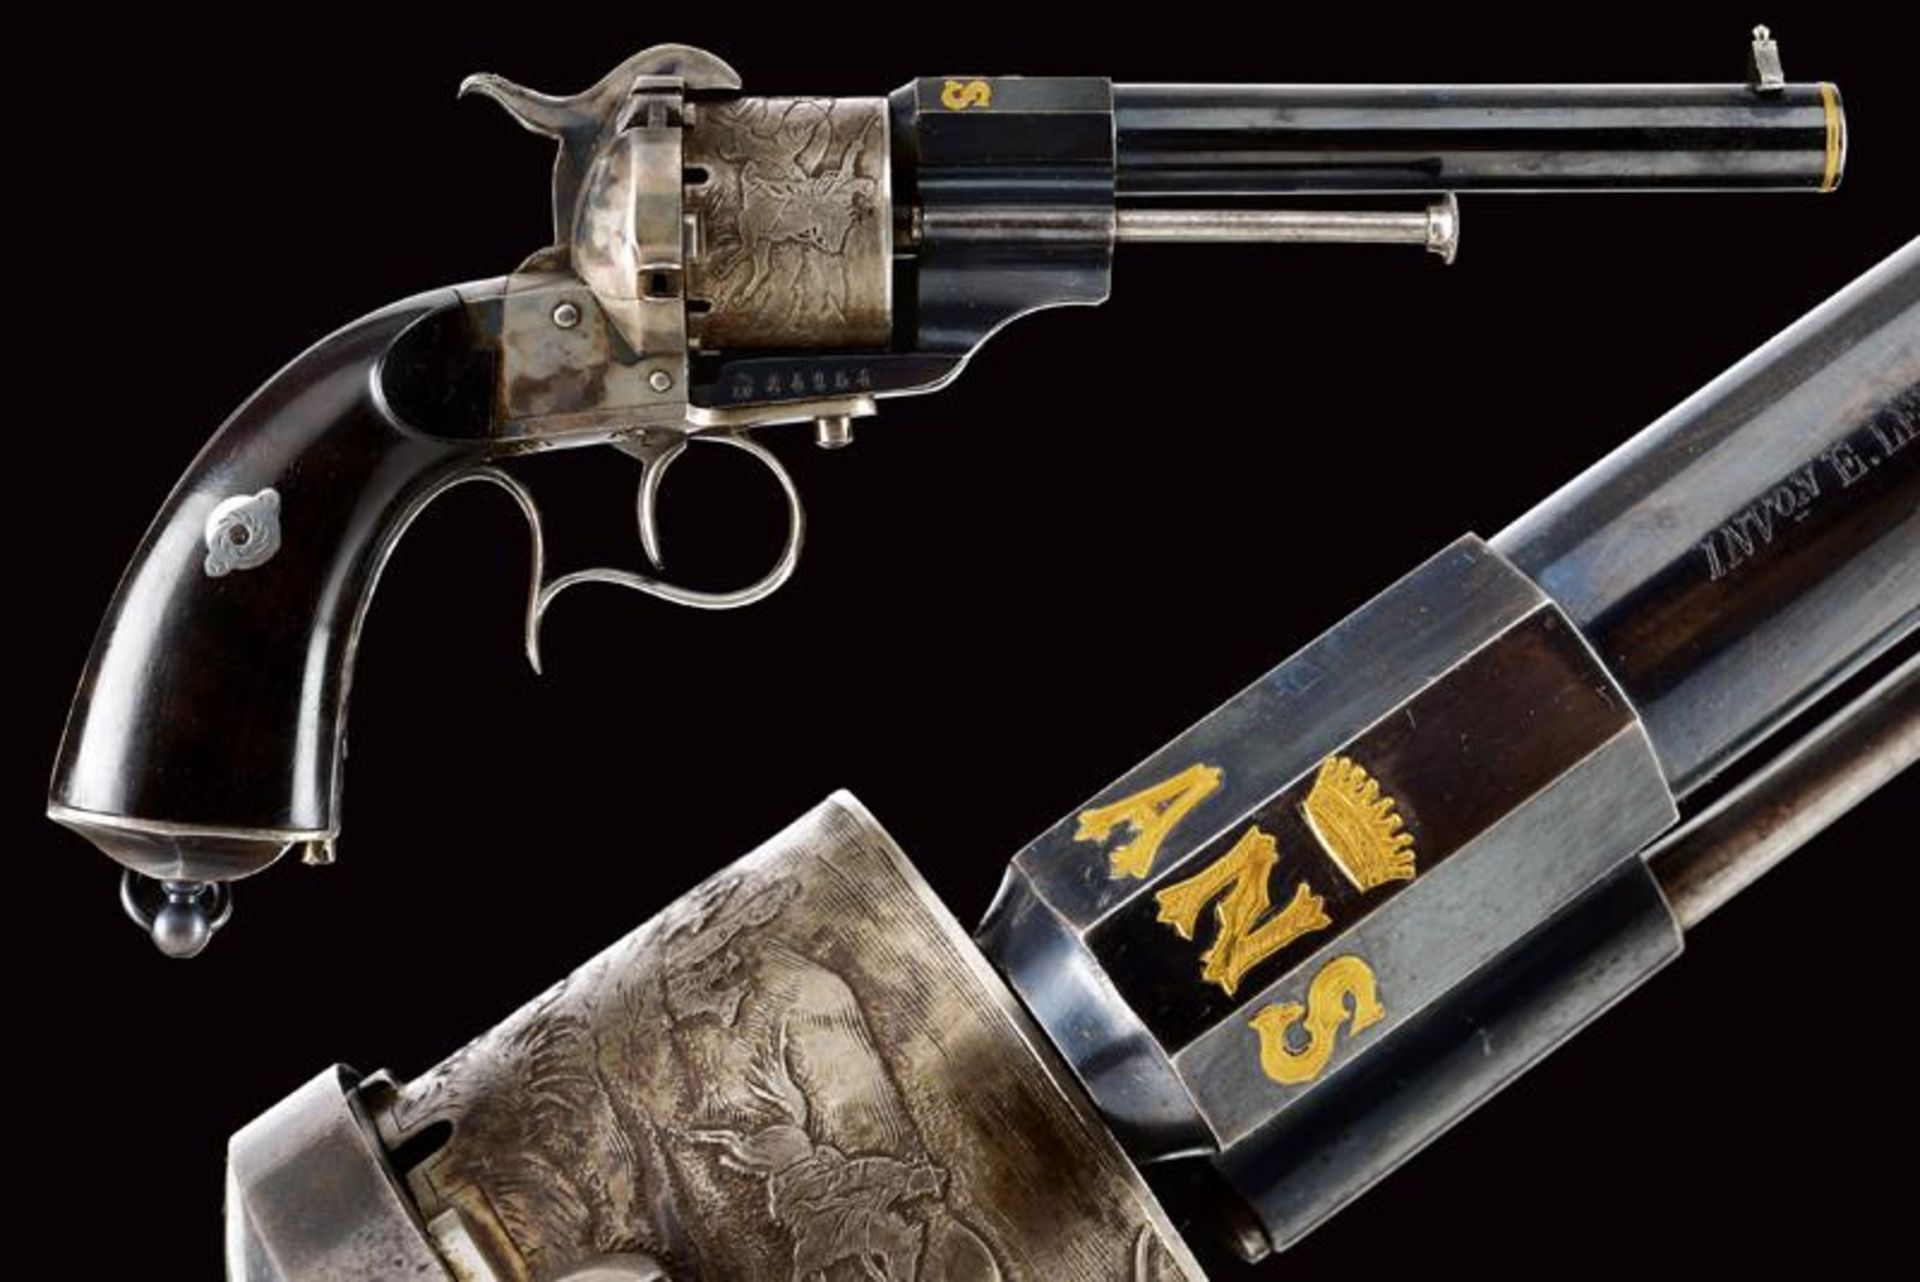 A beautiful 1858 model pin-fire revolver from the property of general A. Negri of Sanfront